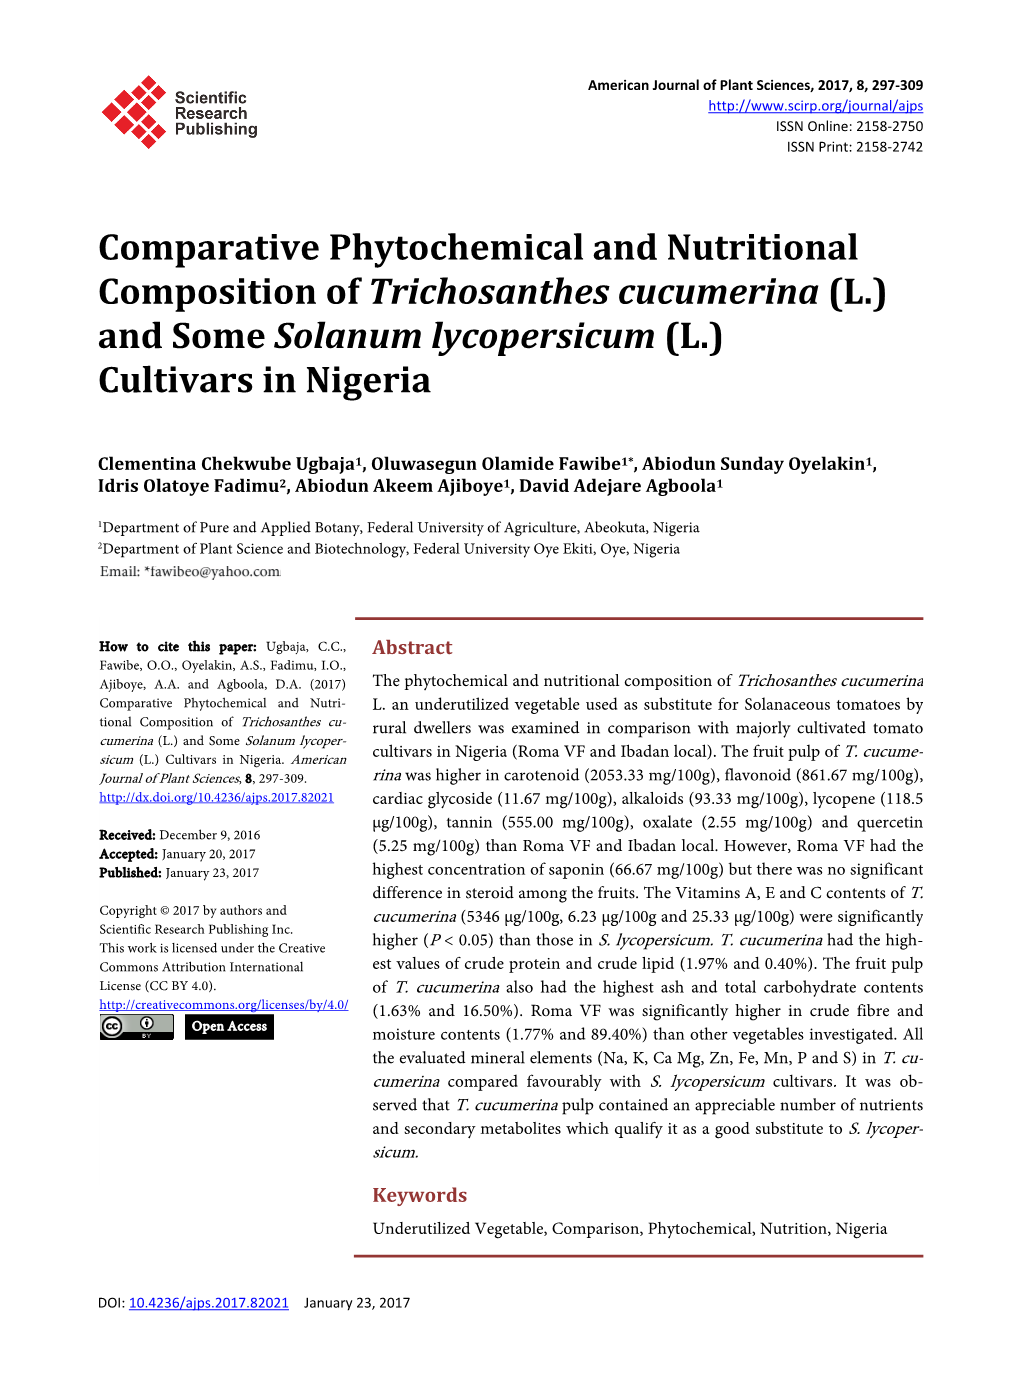 Comparative Phytochemical and Nutritional Composition of Trichosanthes Cucumerina (L.) and Some Solanum Lycopersicum (L.) Cultivars in Nigeria